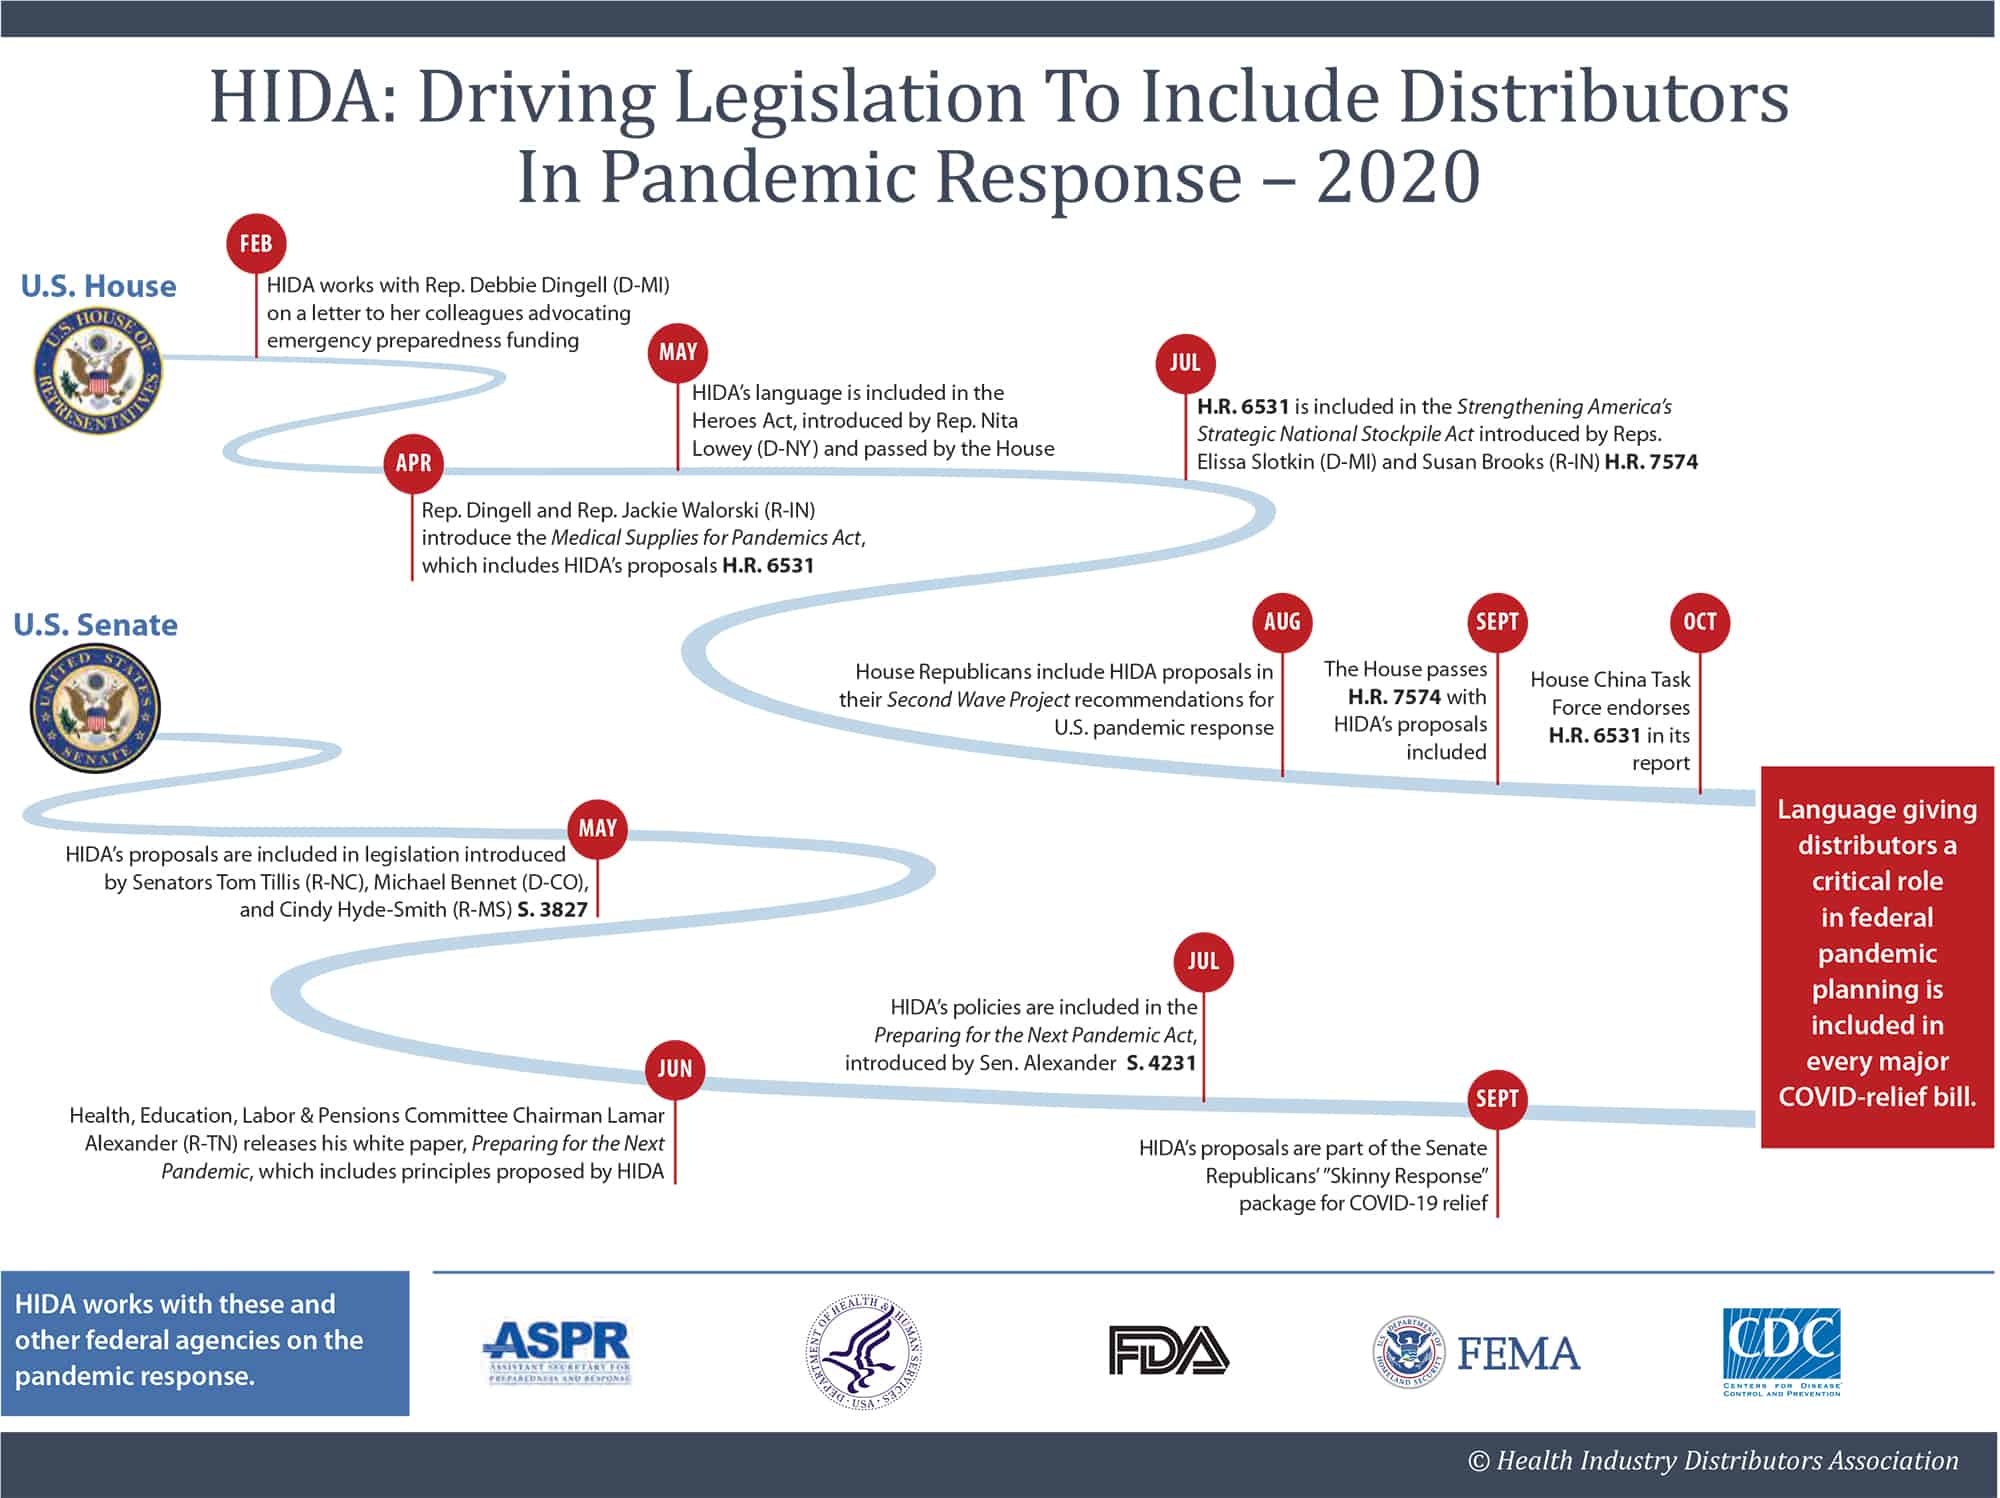 Infographic: Driving Legislation To Include Distributors In Pandemic Response. Please enable images to view.